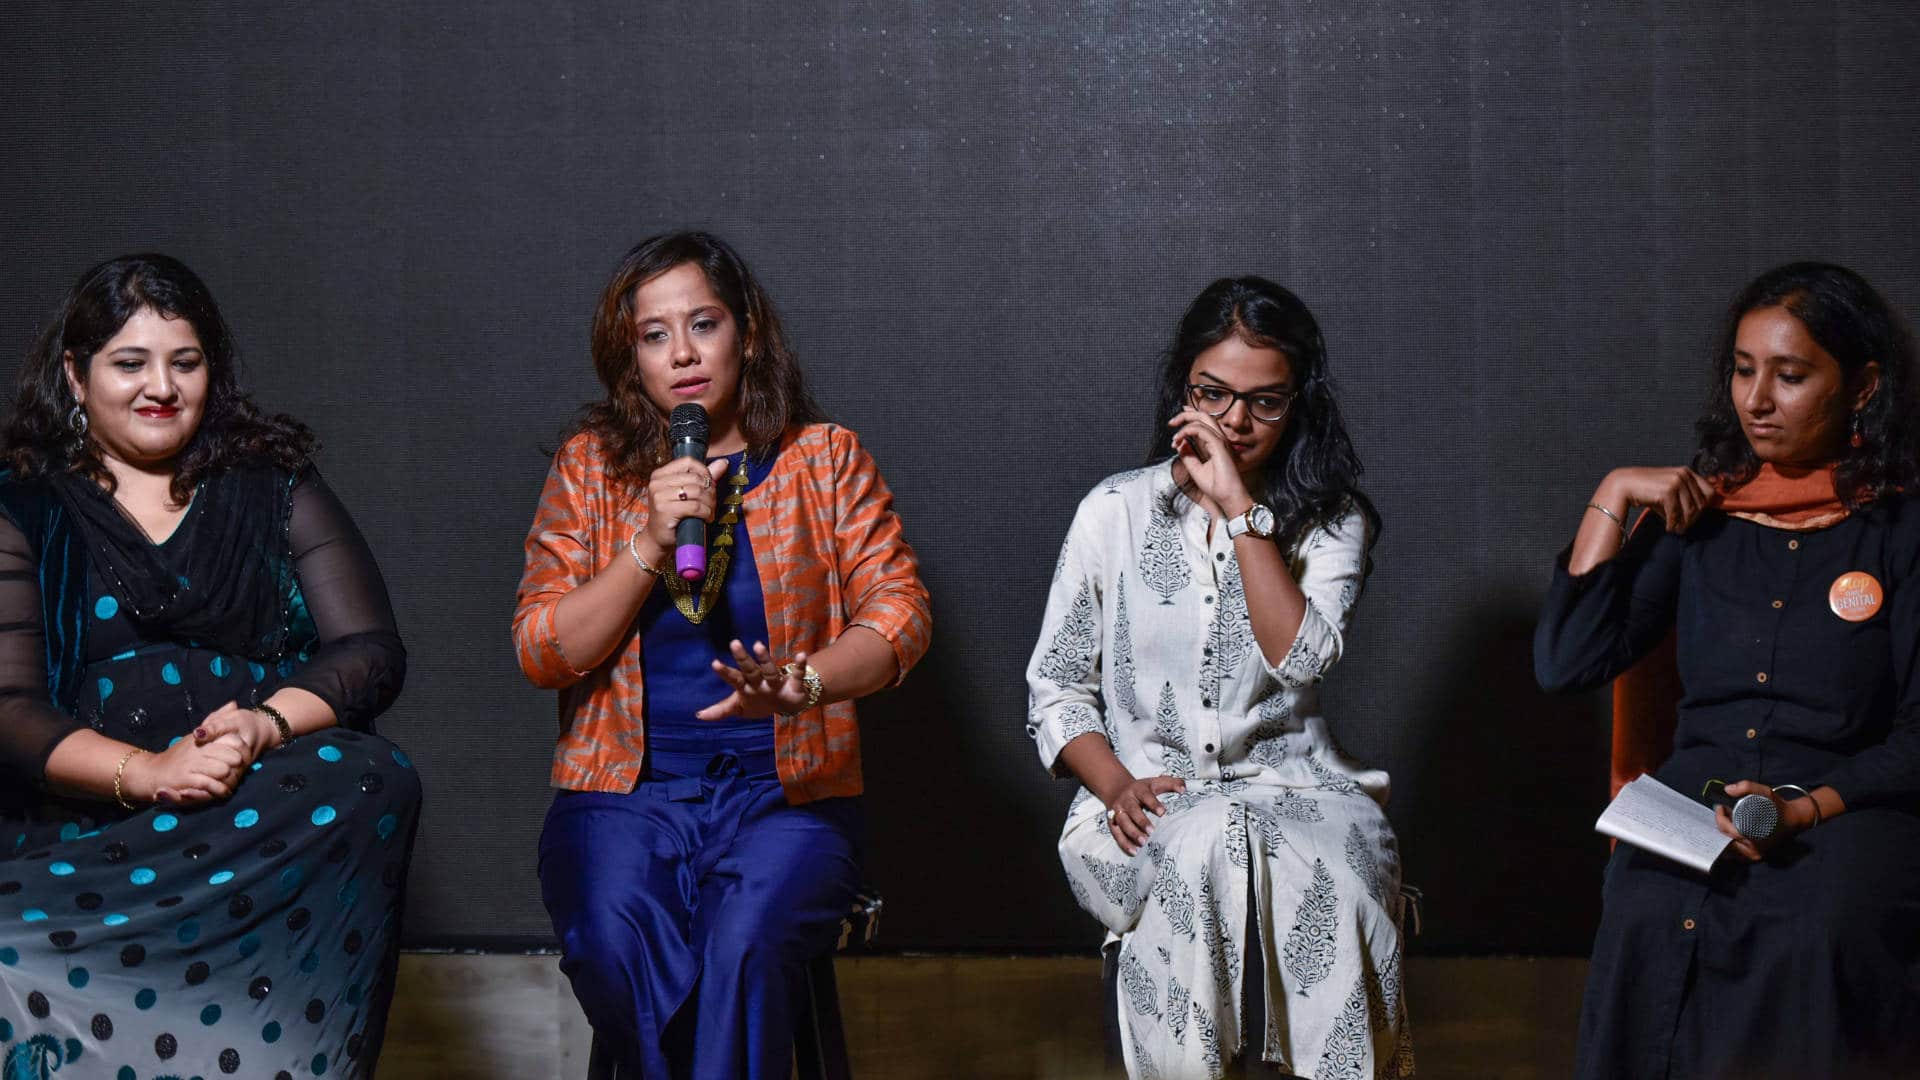 Aarefa Johari, far right, along with other survivors of female genital mutilation, speaks about her experience at a public forum in Mumbai in 2018. From left to right, the other speakers are Insiya, Samina, and Fatema.